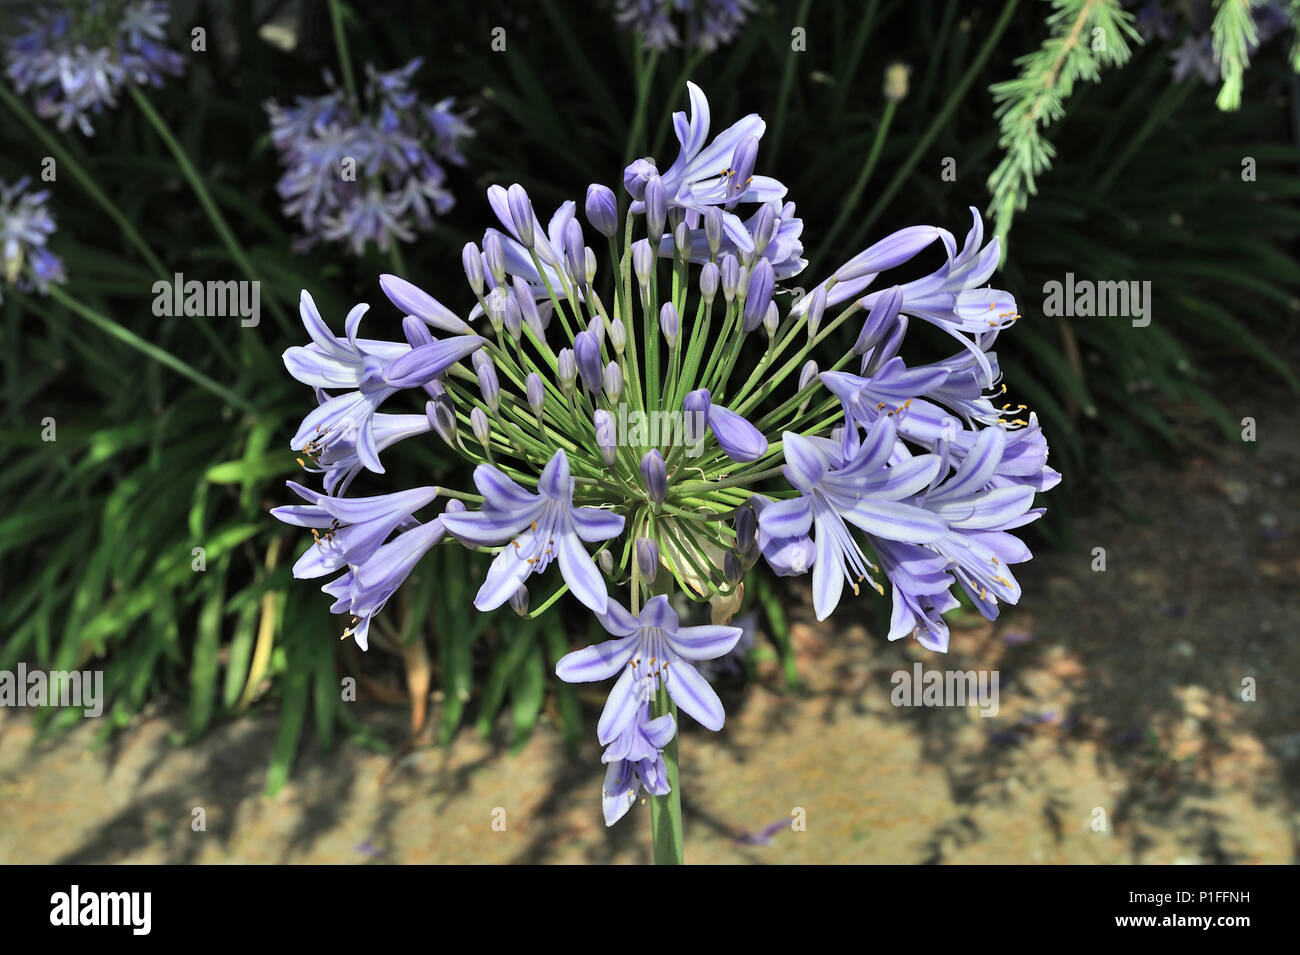 Agapanthus africanus, African Lily, Lily of the Nile, Laguna Hills, CA 080521 30478 Stock Photo